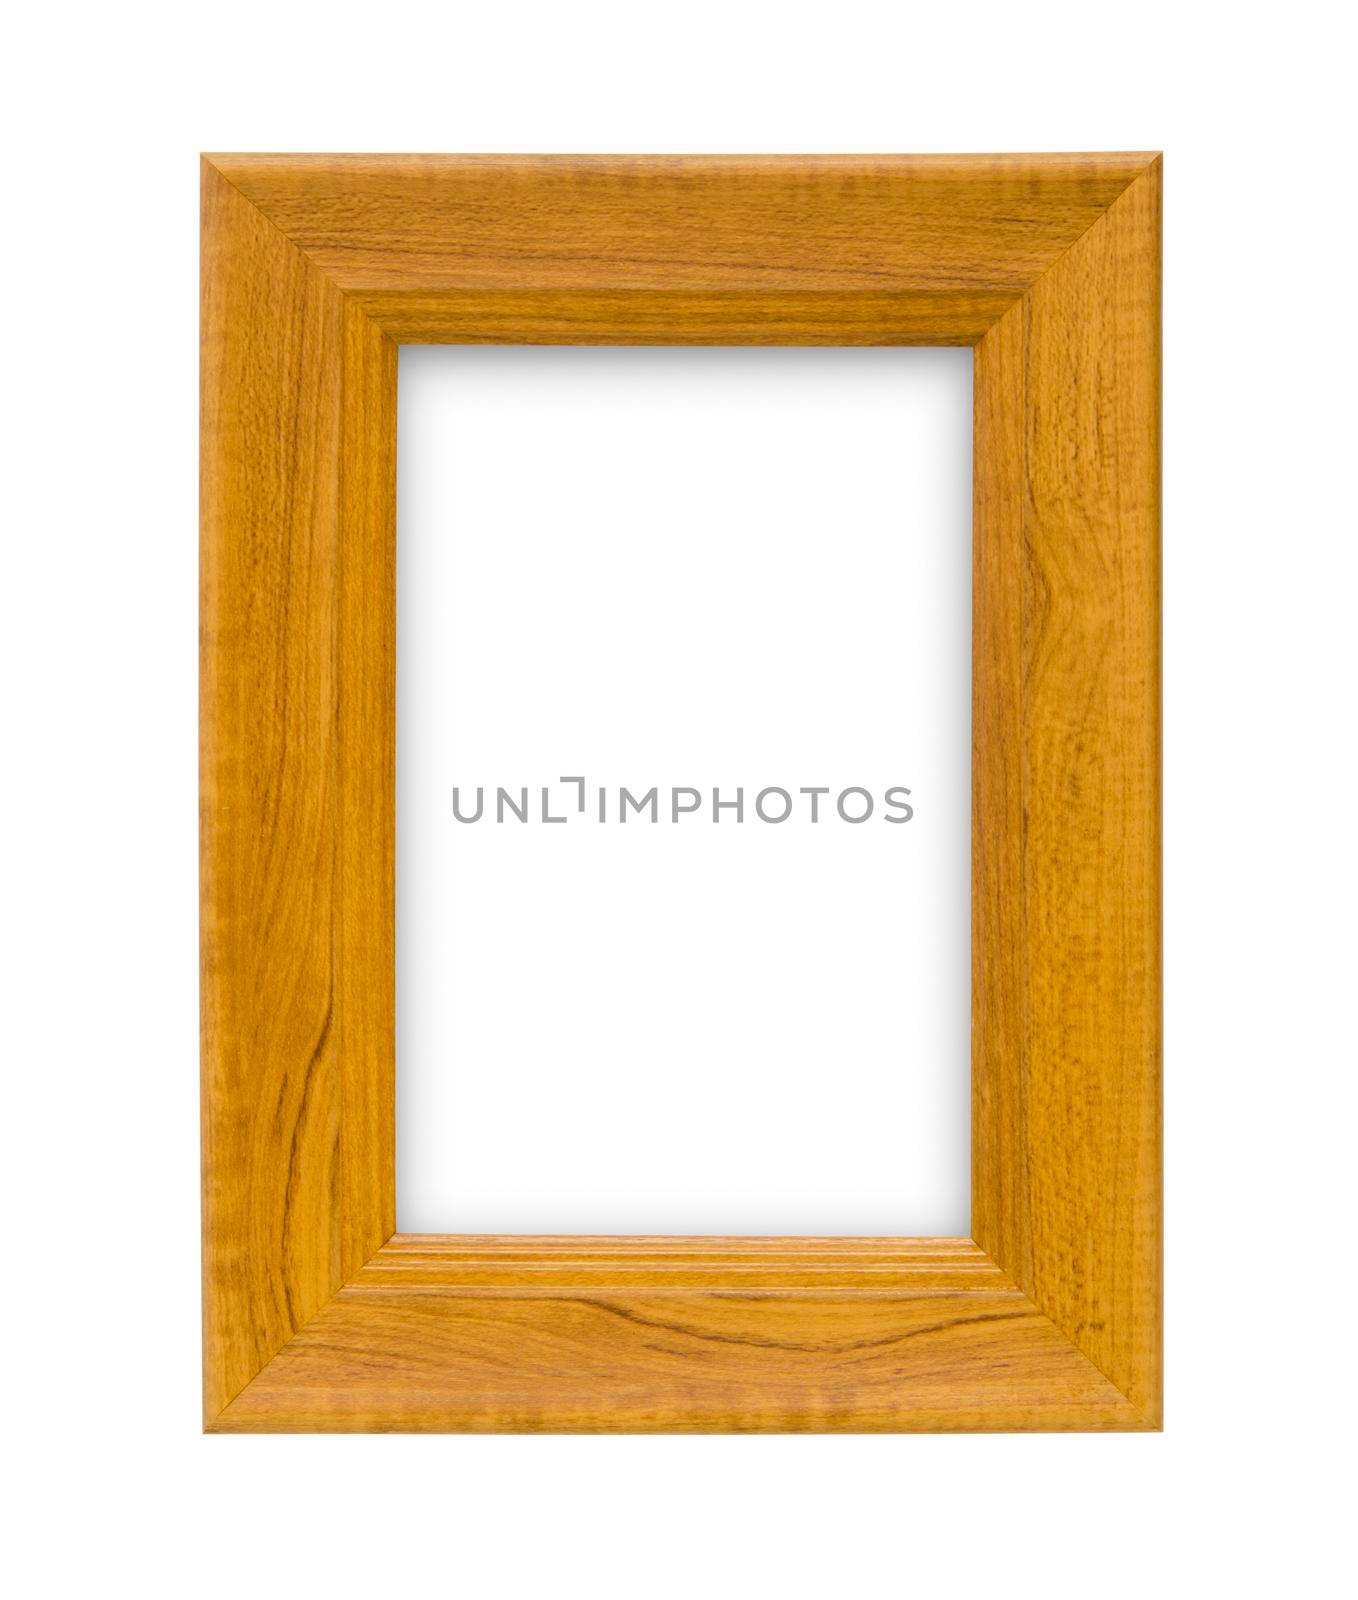 Empty wooden frame isolated on white background, Save clipping path.